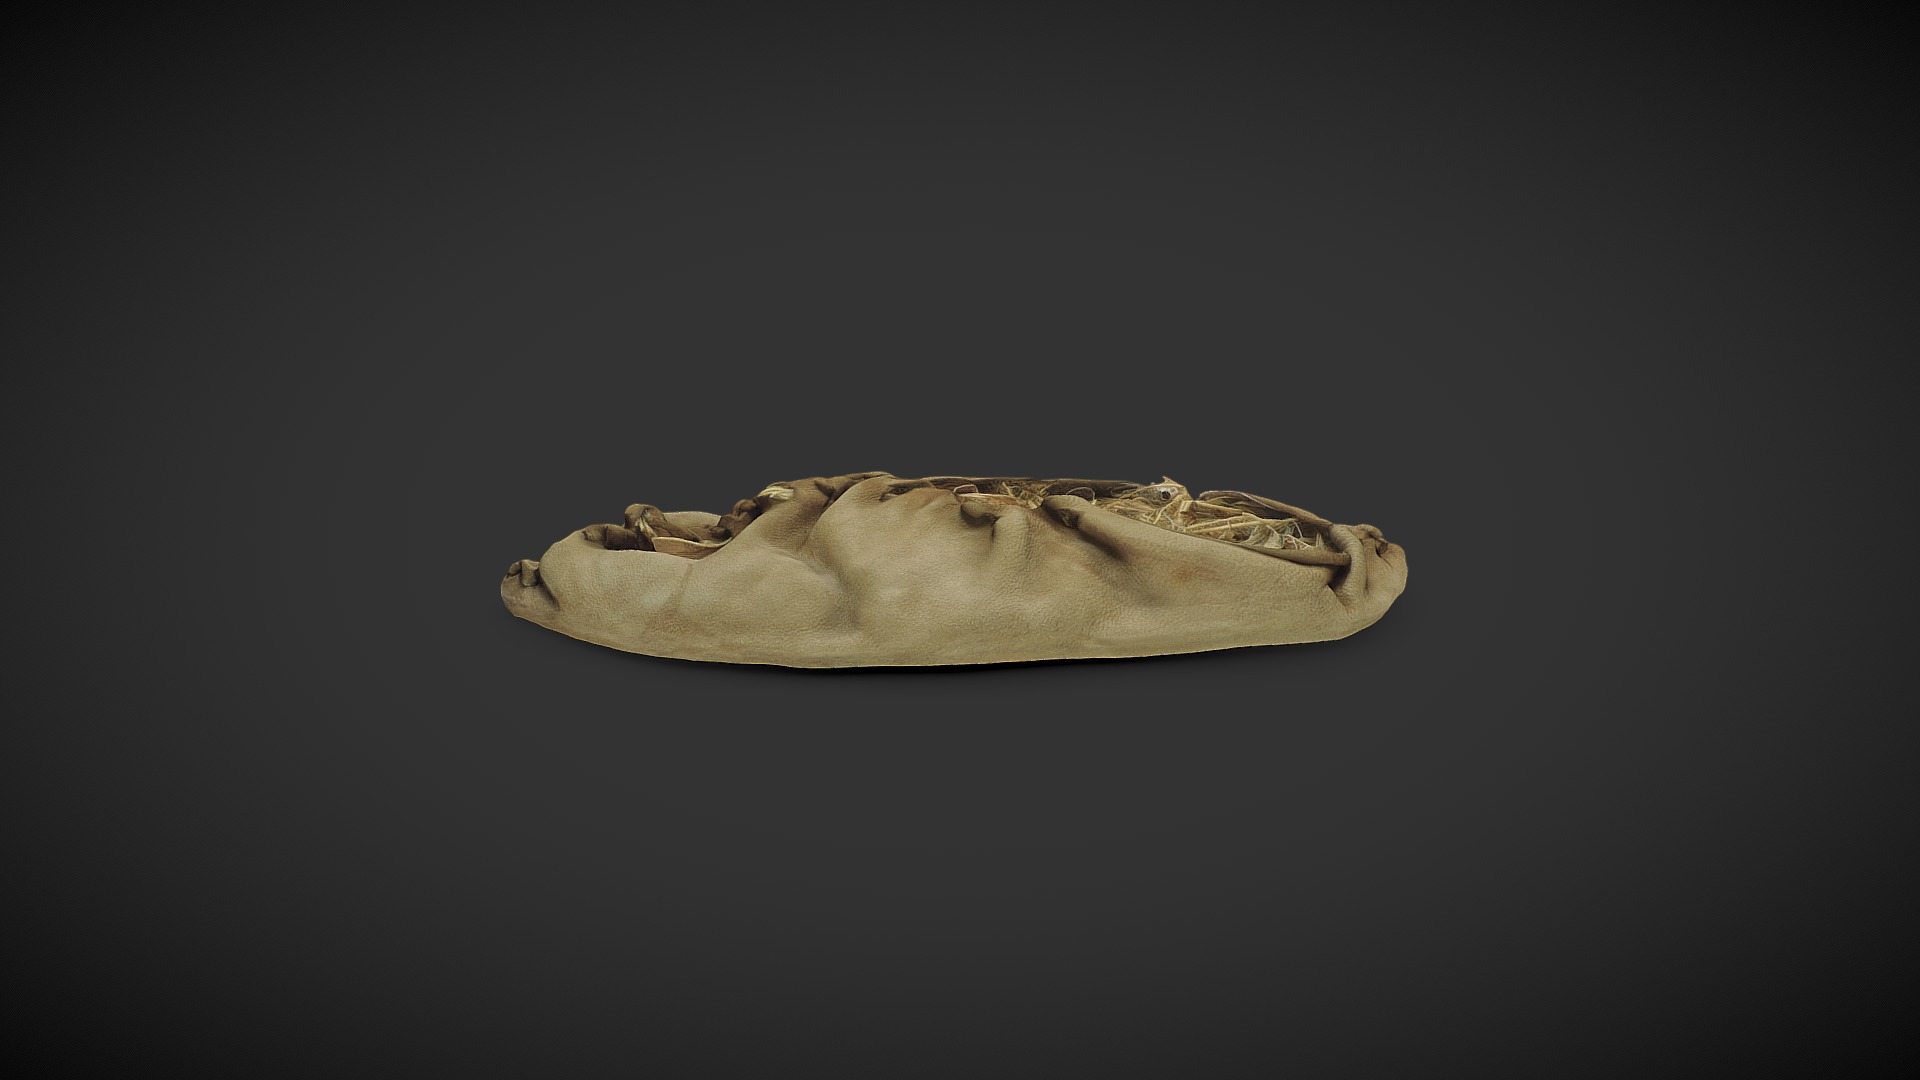 3D model The 5,500 years old shoe - This is a 3D model of the The 5,500 years old shoe. The 3D model is about a stone with a design on it.